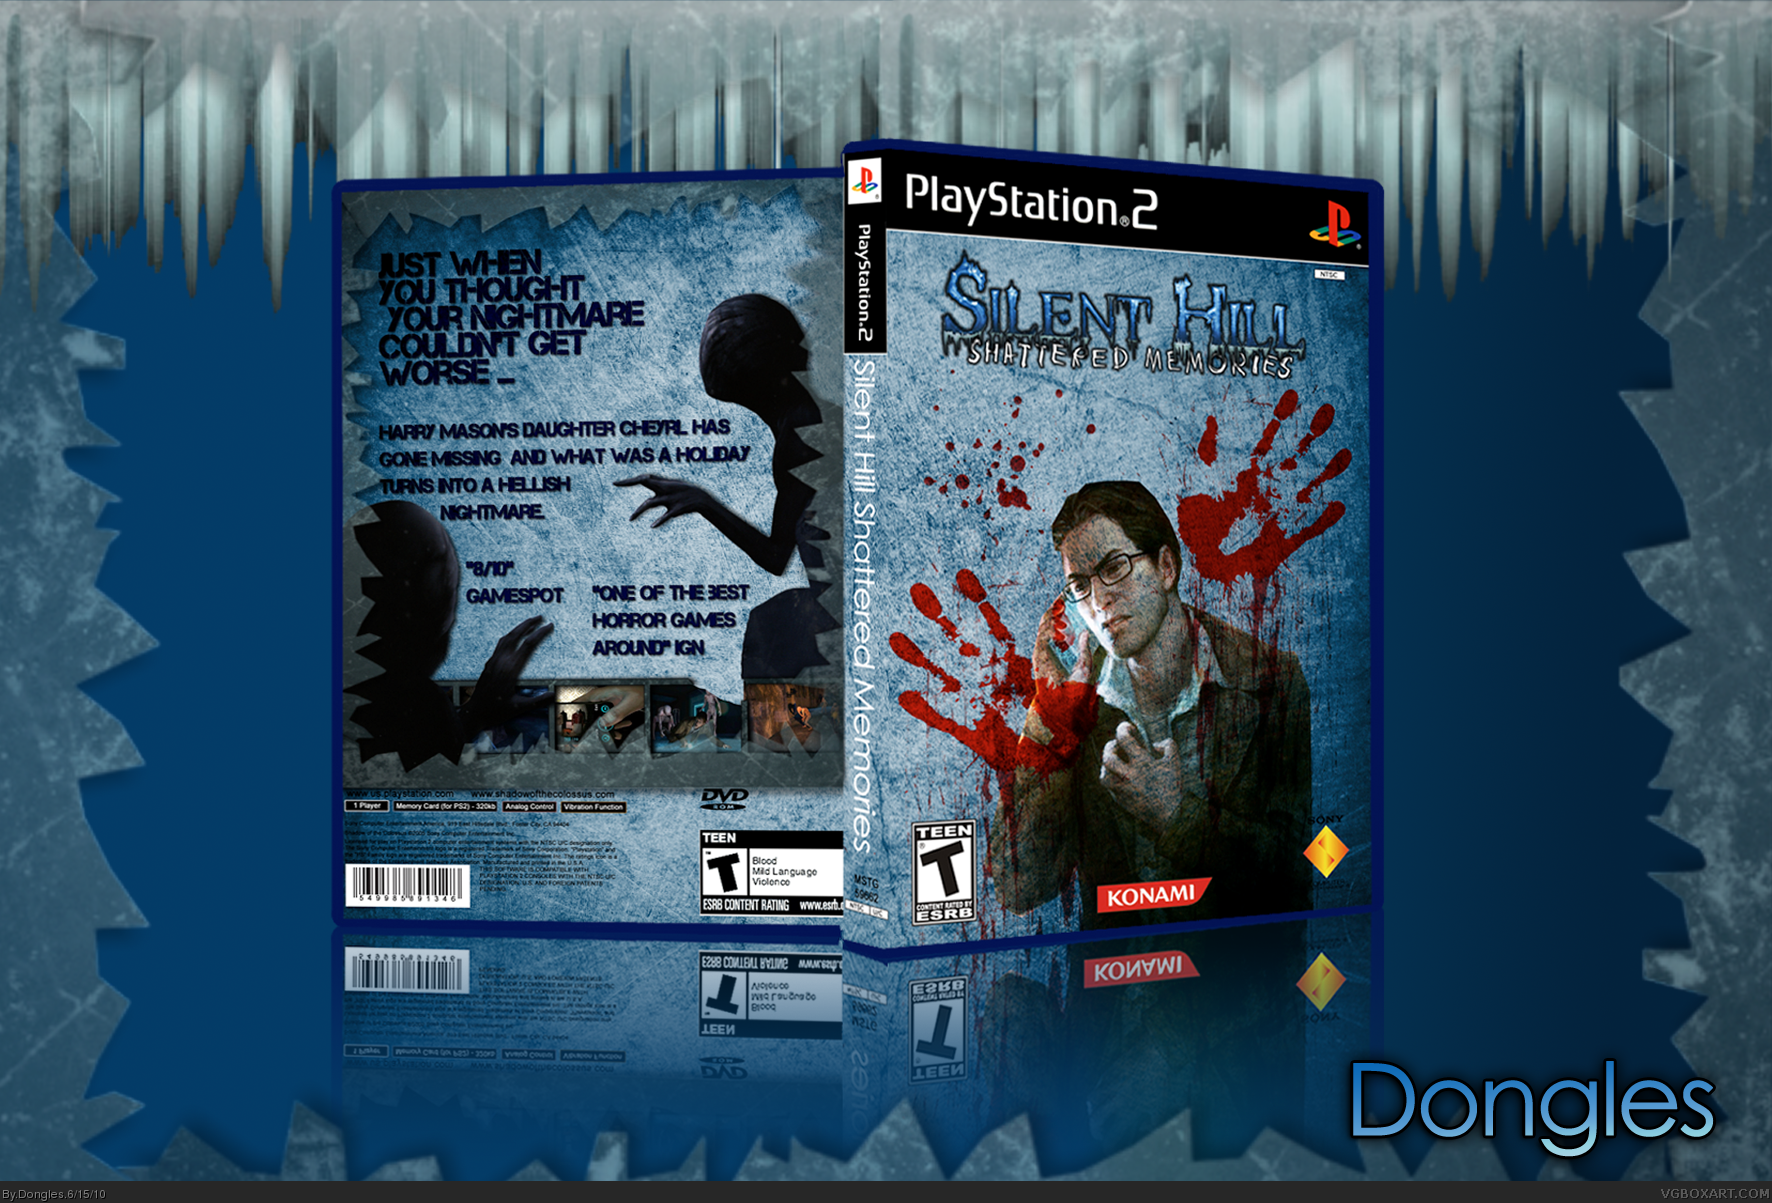 silent hill shattered memories ps2 cover